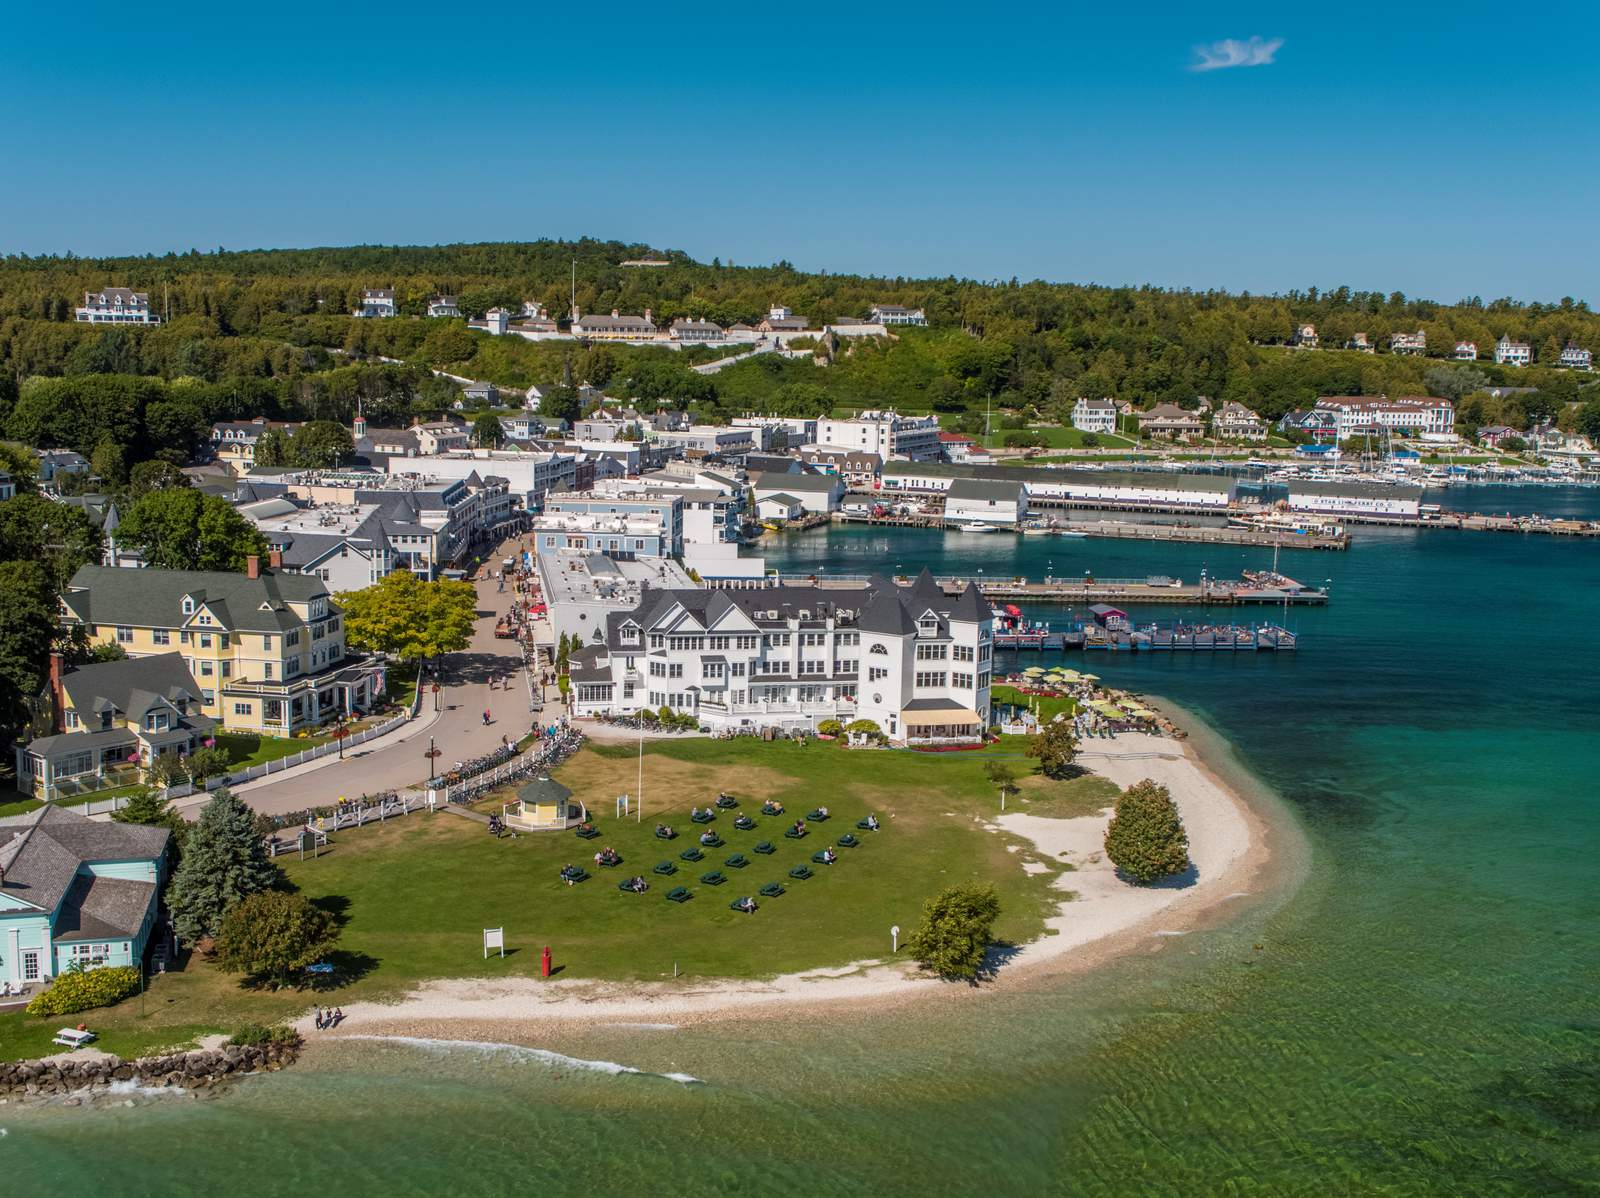 3 things to know about Mackinac Island in 2021